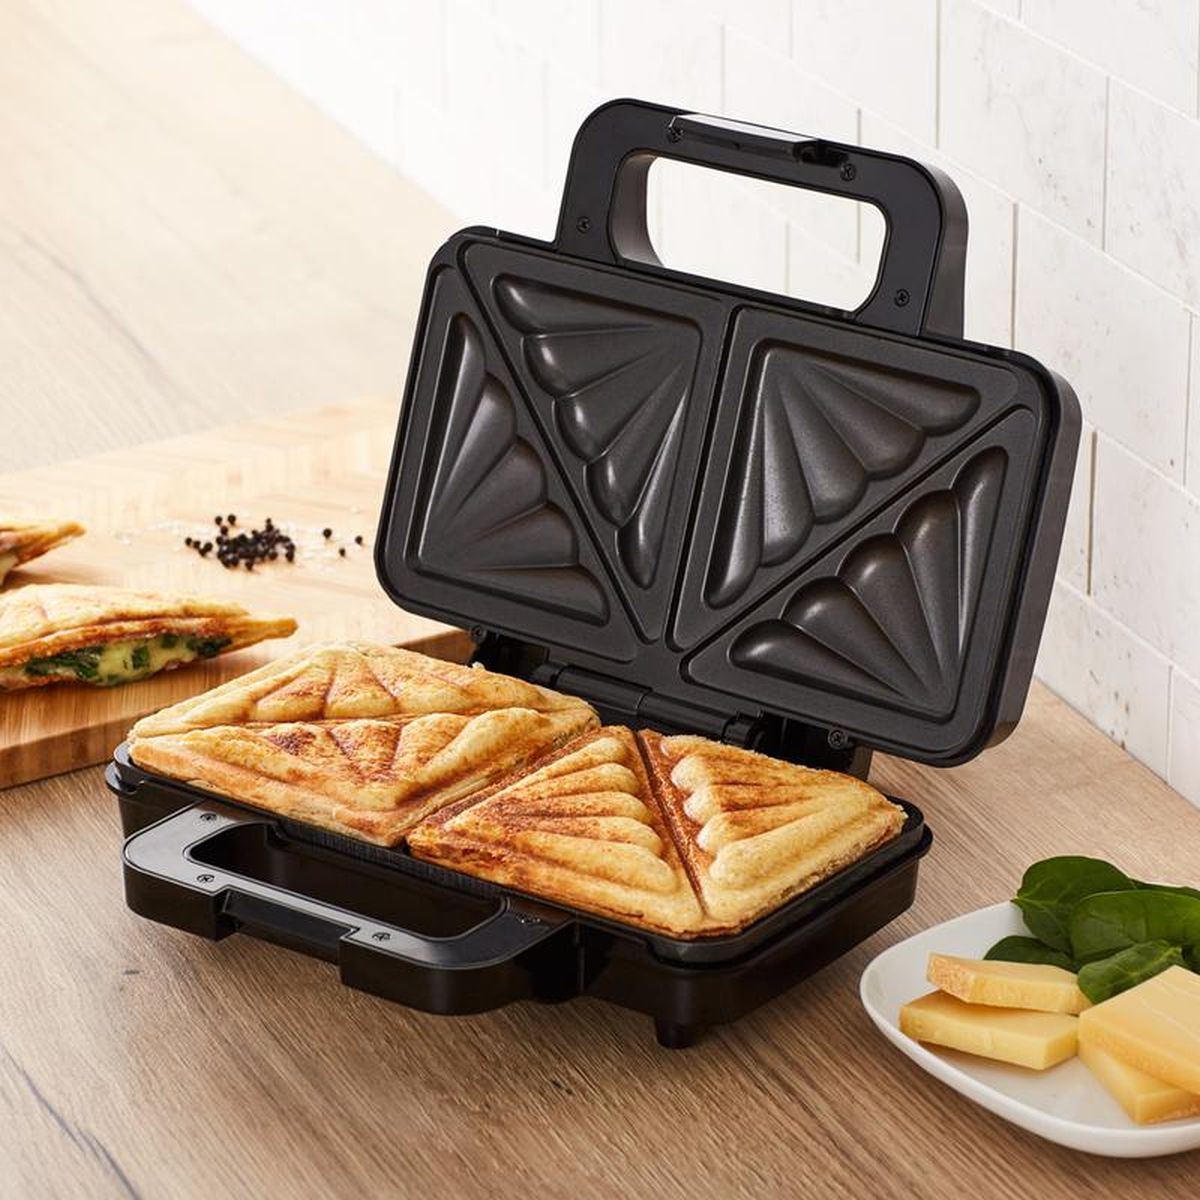 https://www.tonggardencentre.co.uk/shop/gallery/Tower%20-%20Sandwich%20Toaster%20Deep%20Fill%20Black%20Stainless%20Steel%20(3).jpg